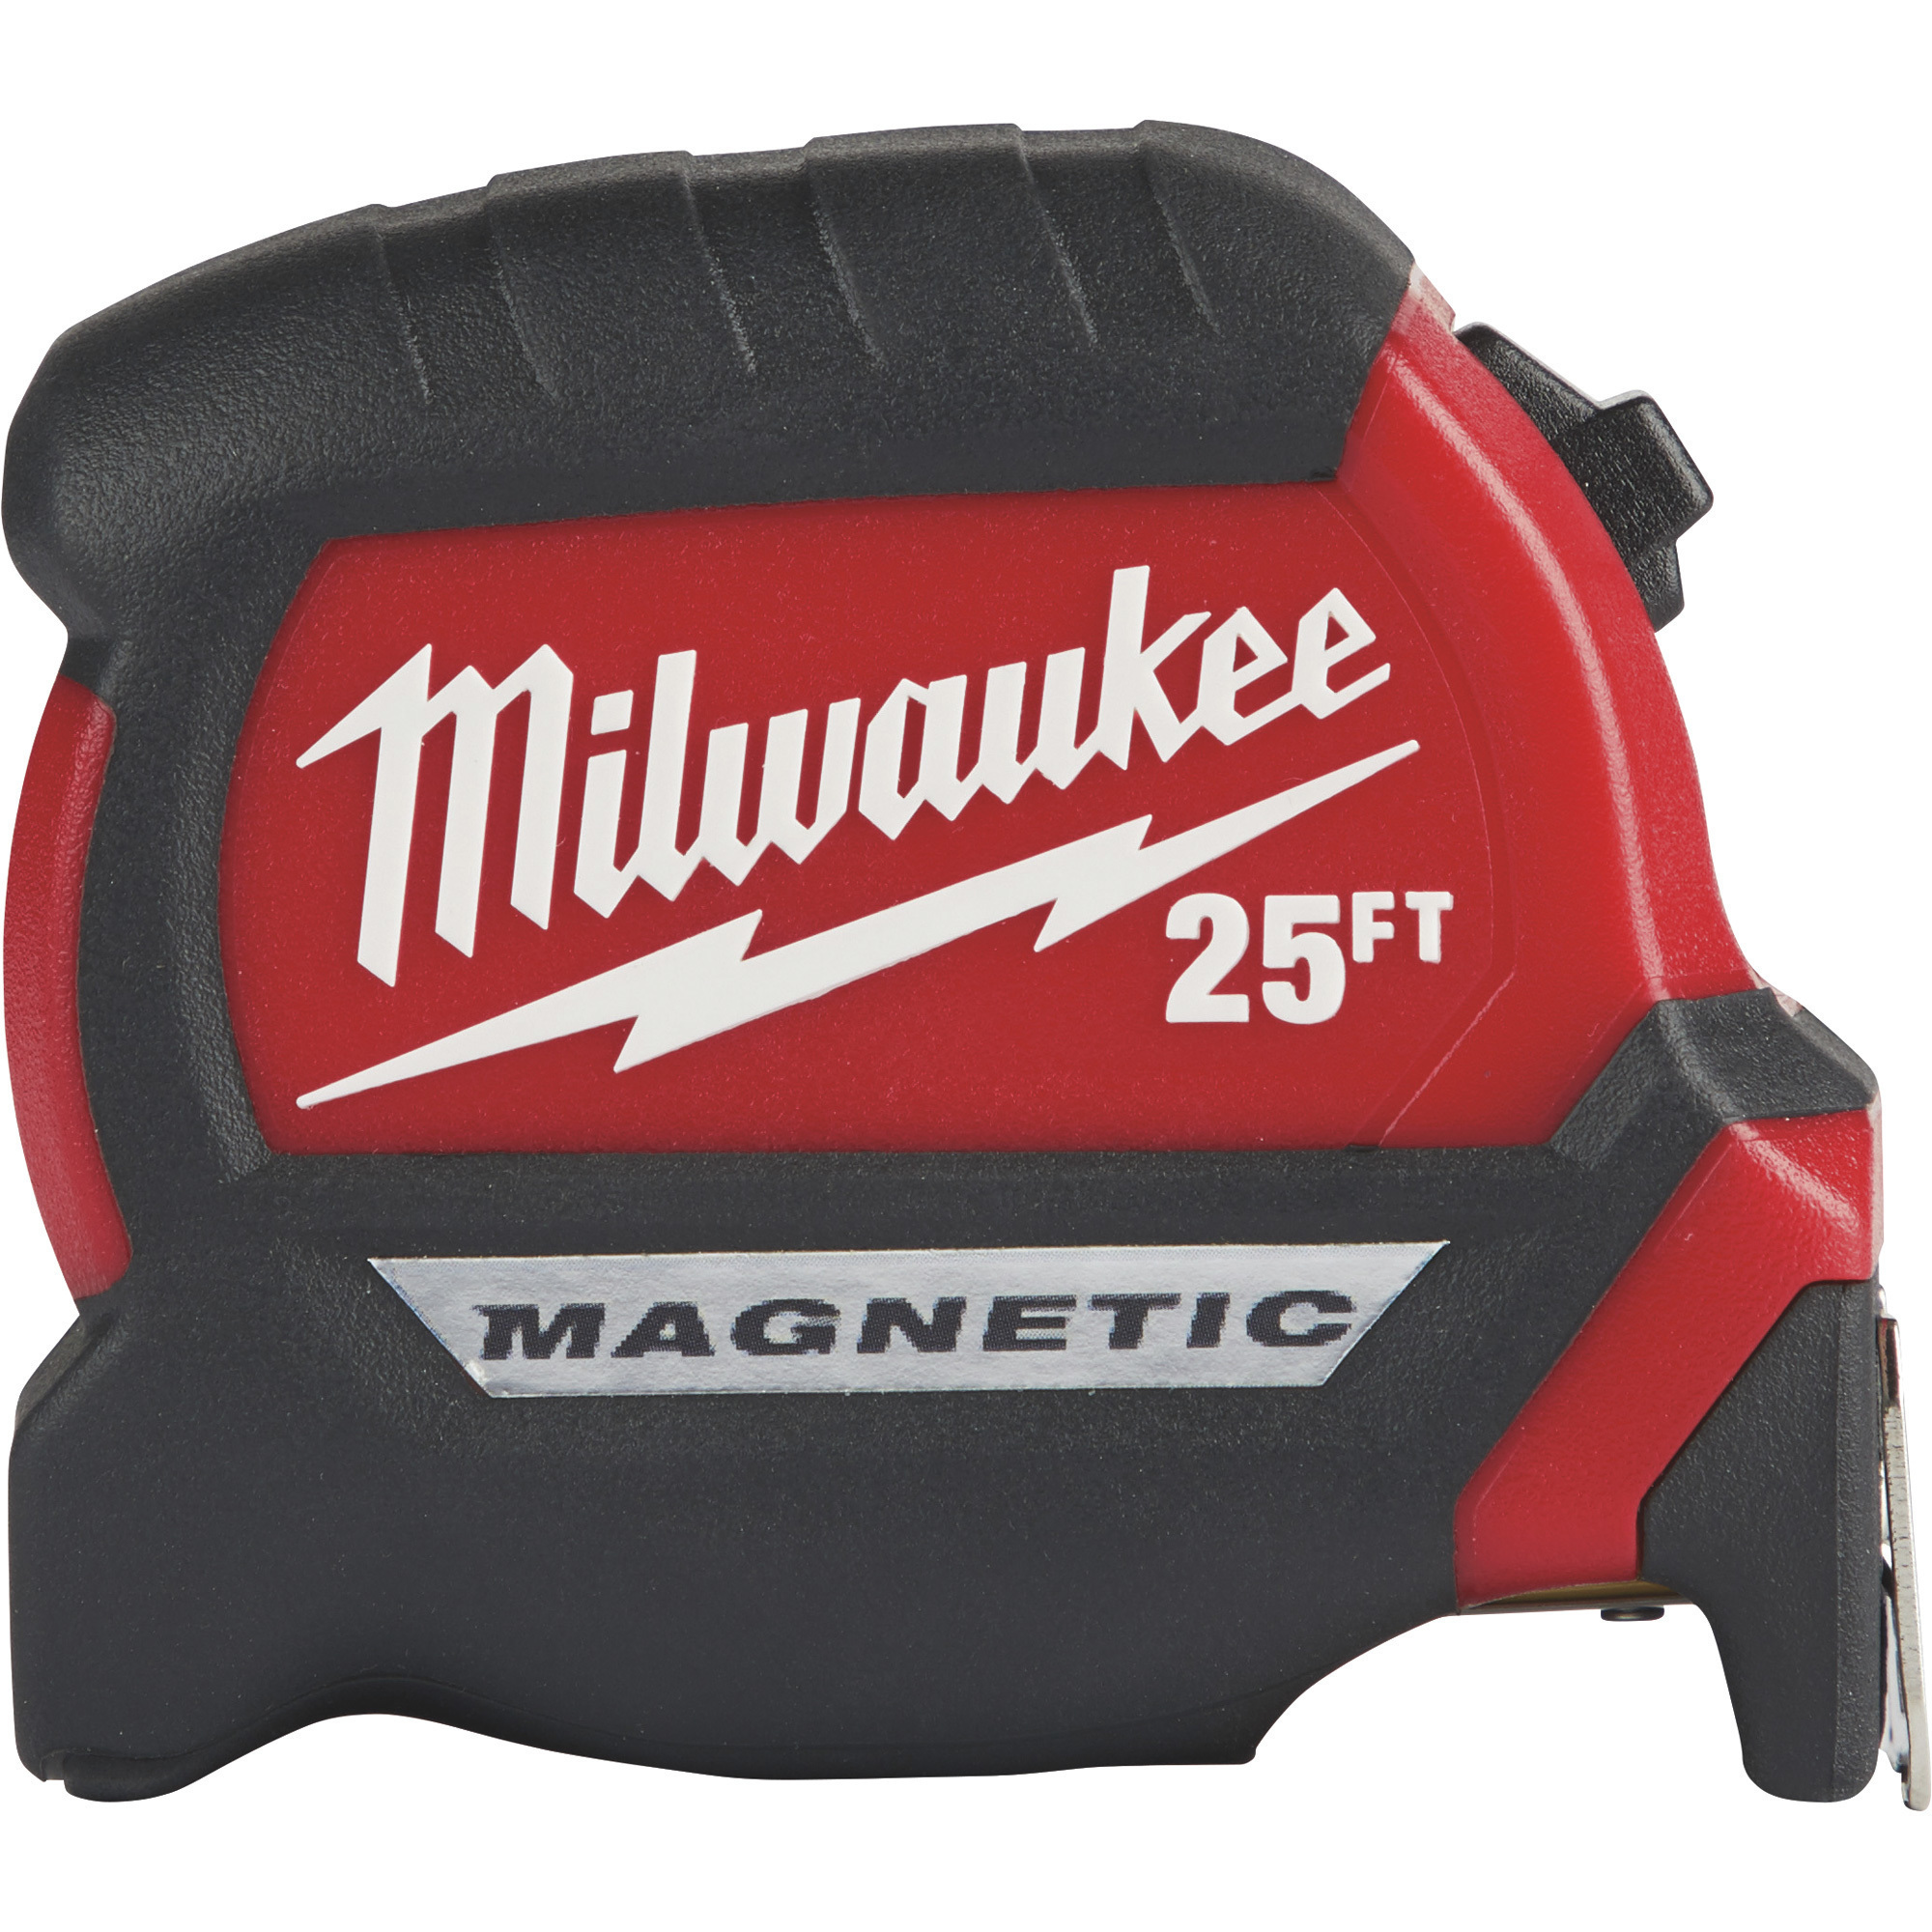 Milwaukee 25ft. Compact Magnetic Tape Measure, Model 48-22-0325